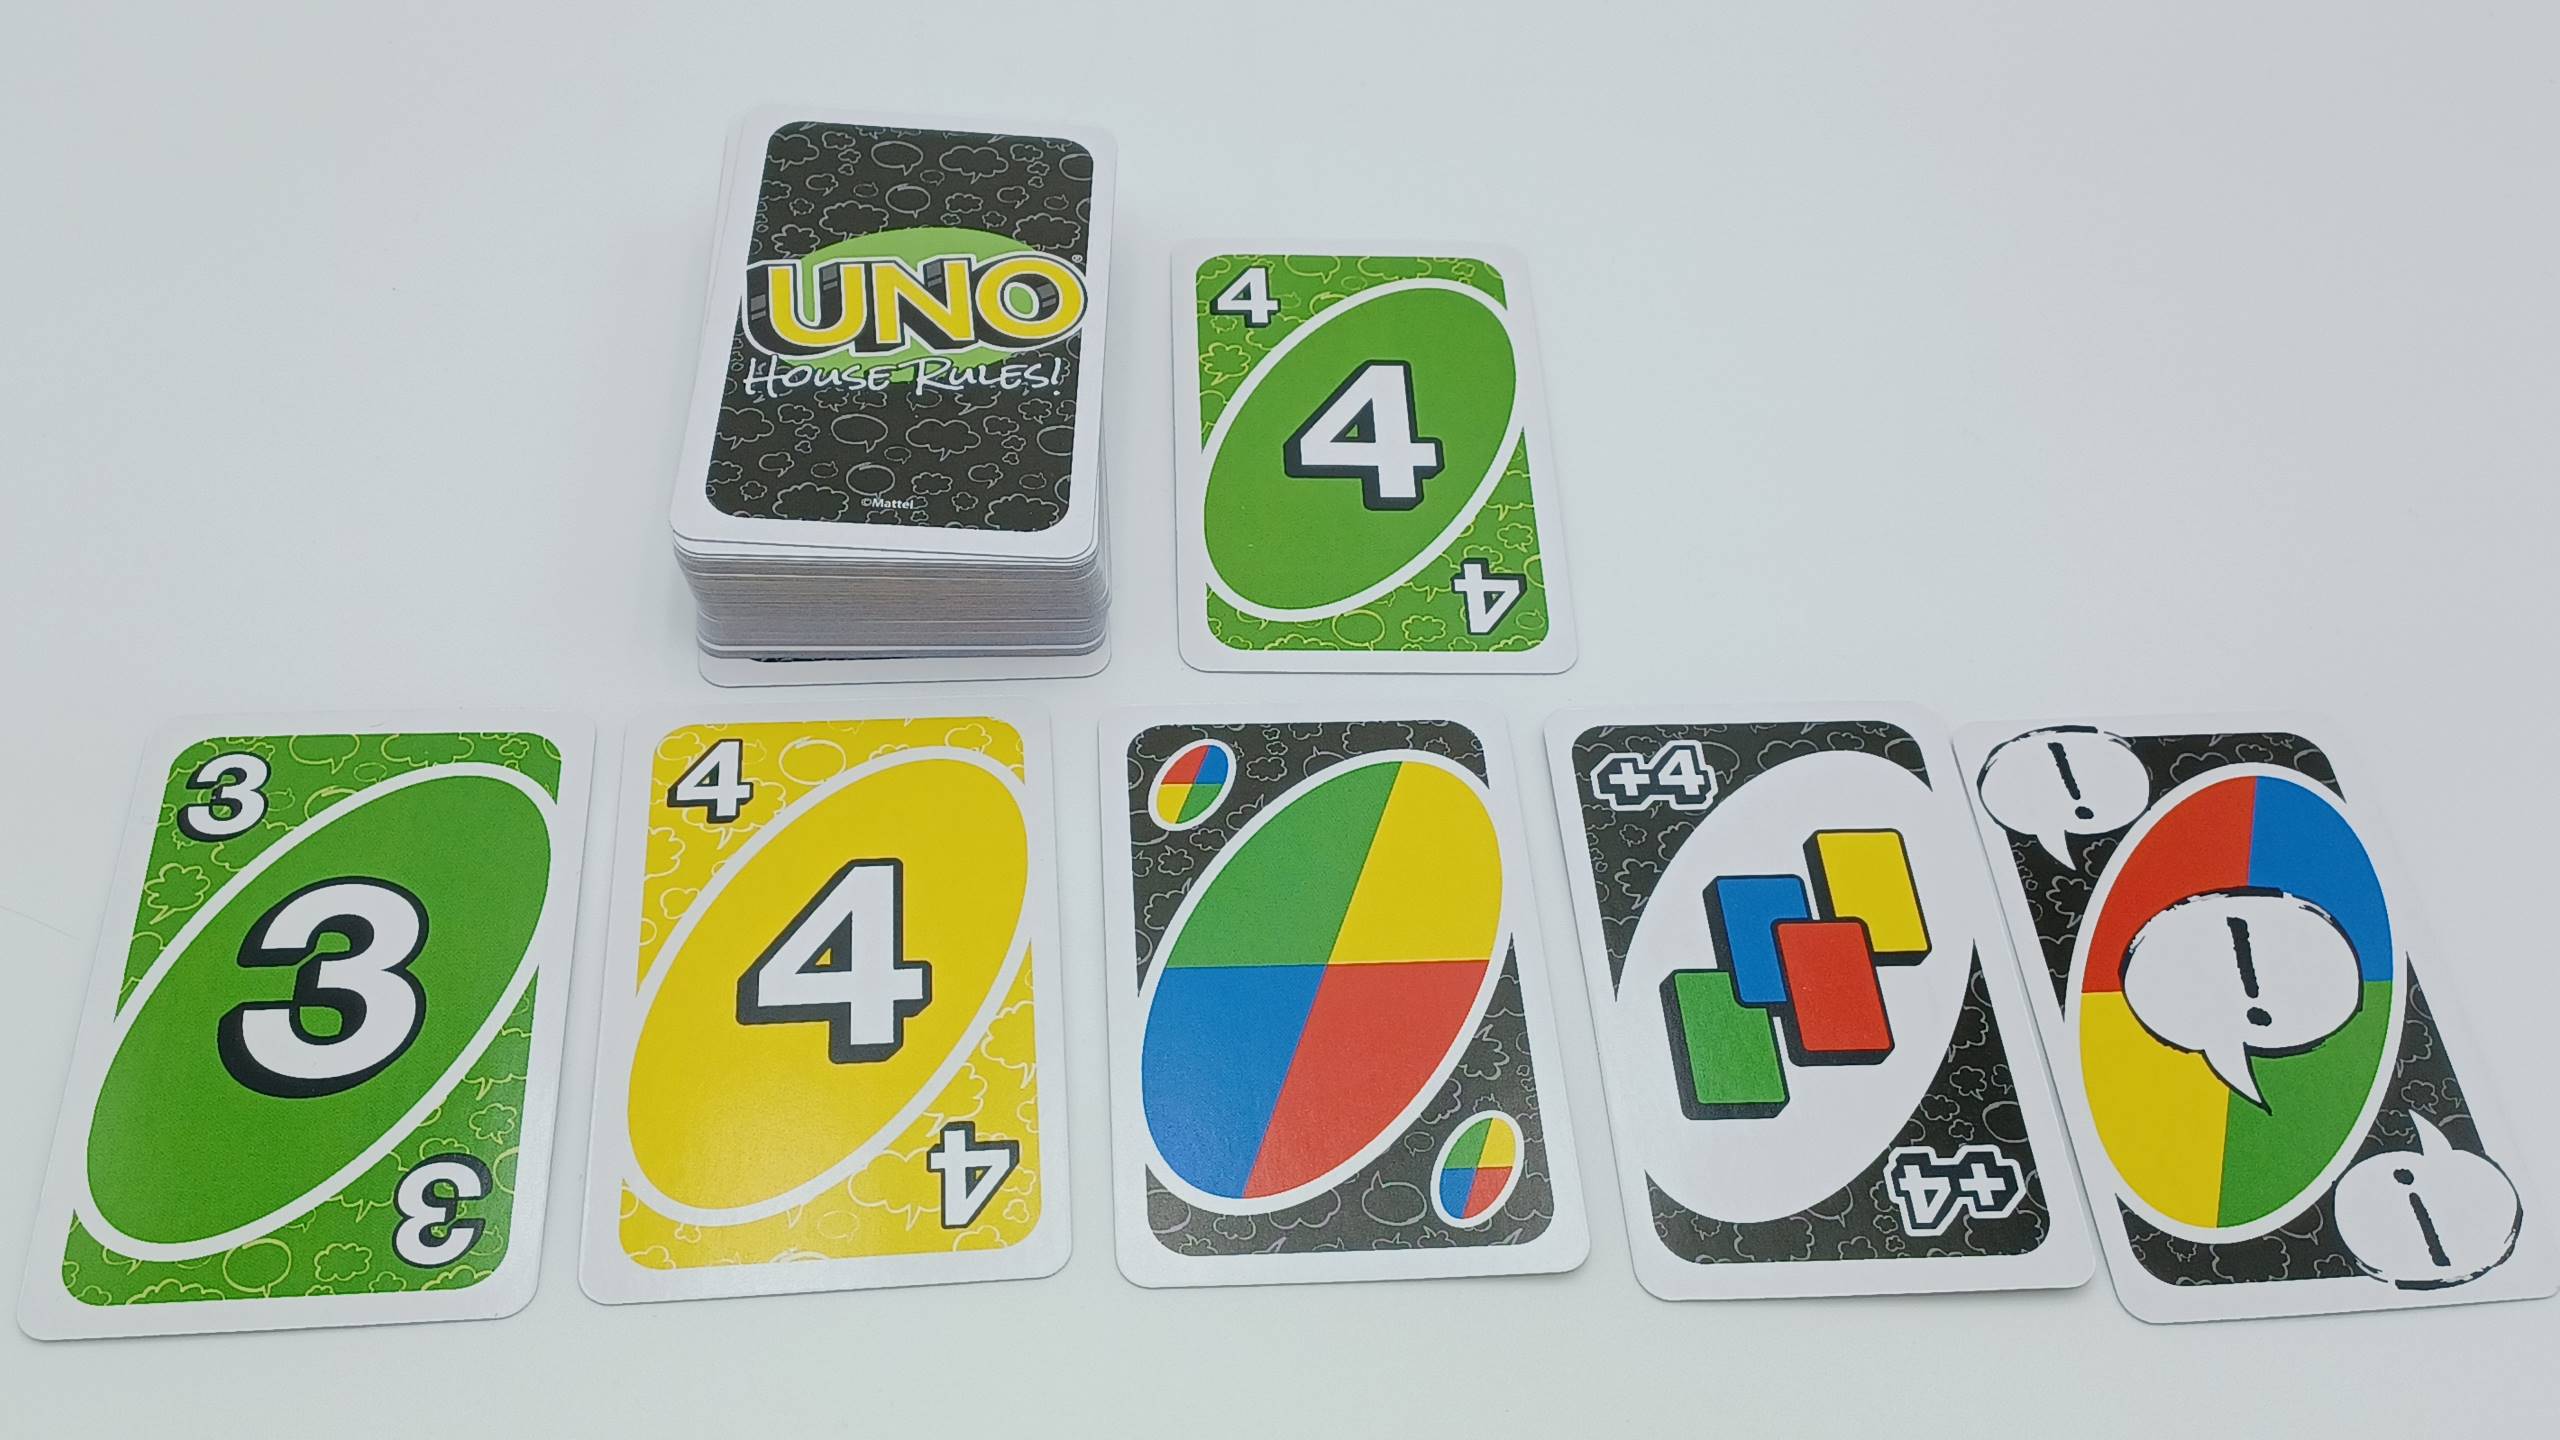 UNO House Rules Playing A Card 1 